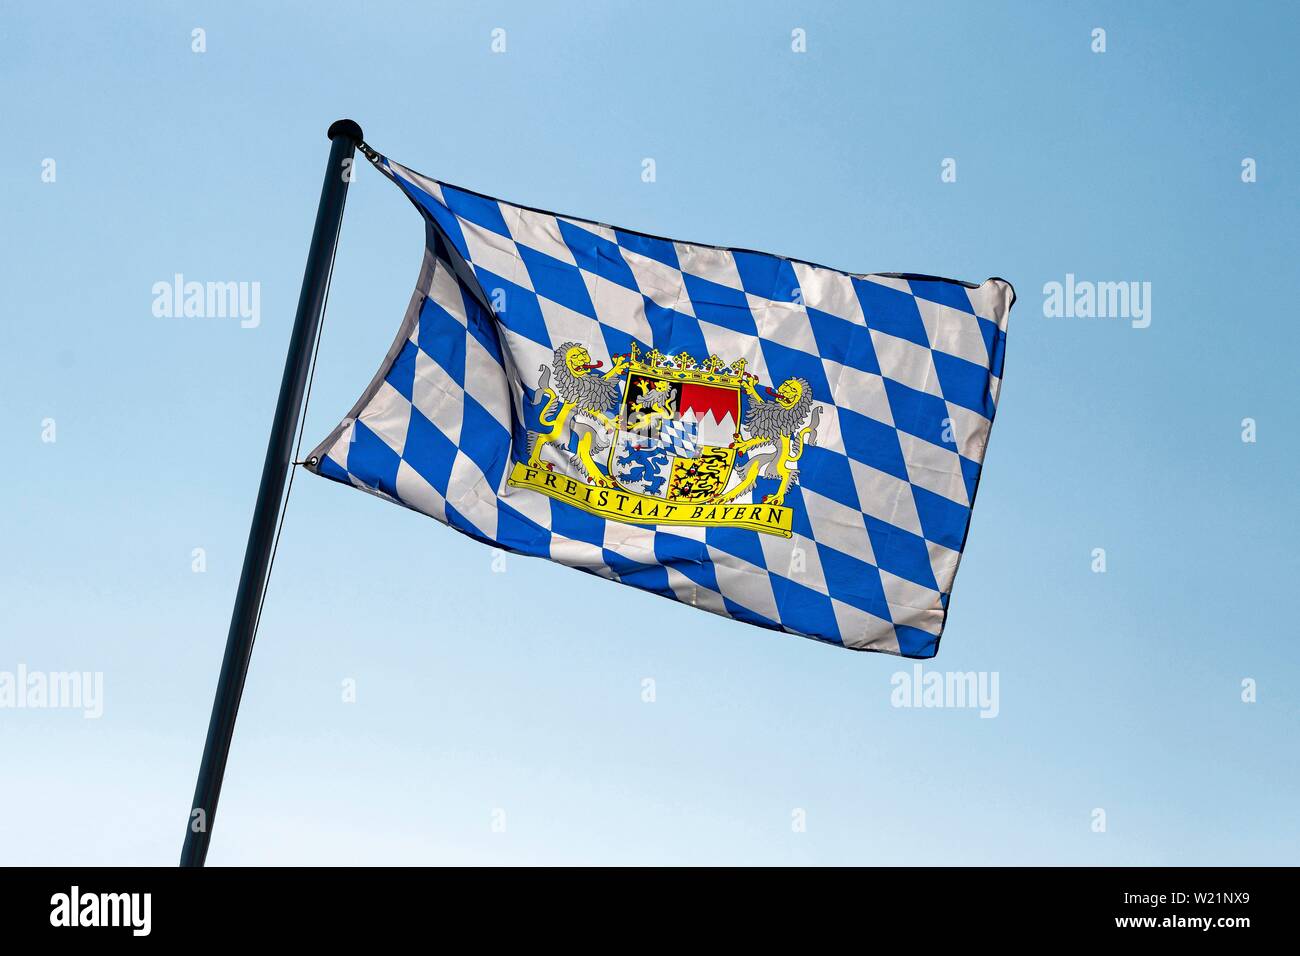 Blue-white flag with coat of arms of the Free State of Bavaria blowing in the wind, Markt Swabia, Bayern, Oberbayern, Germany Stock Photo